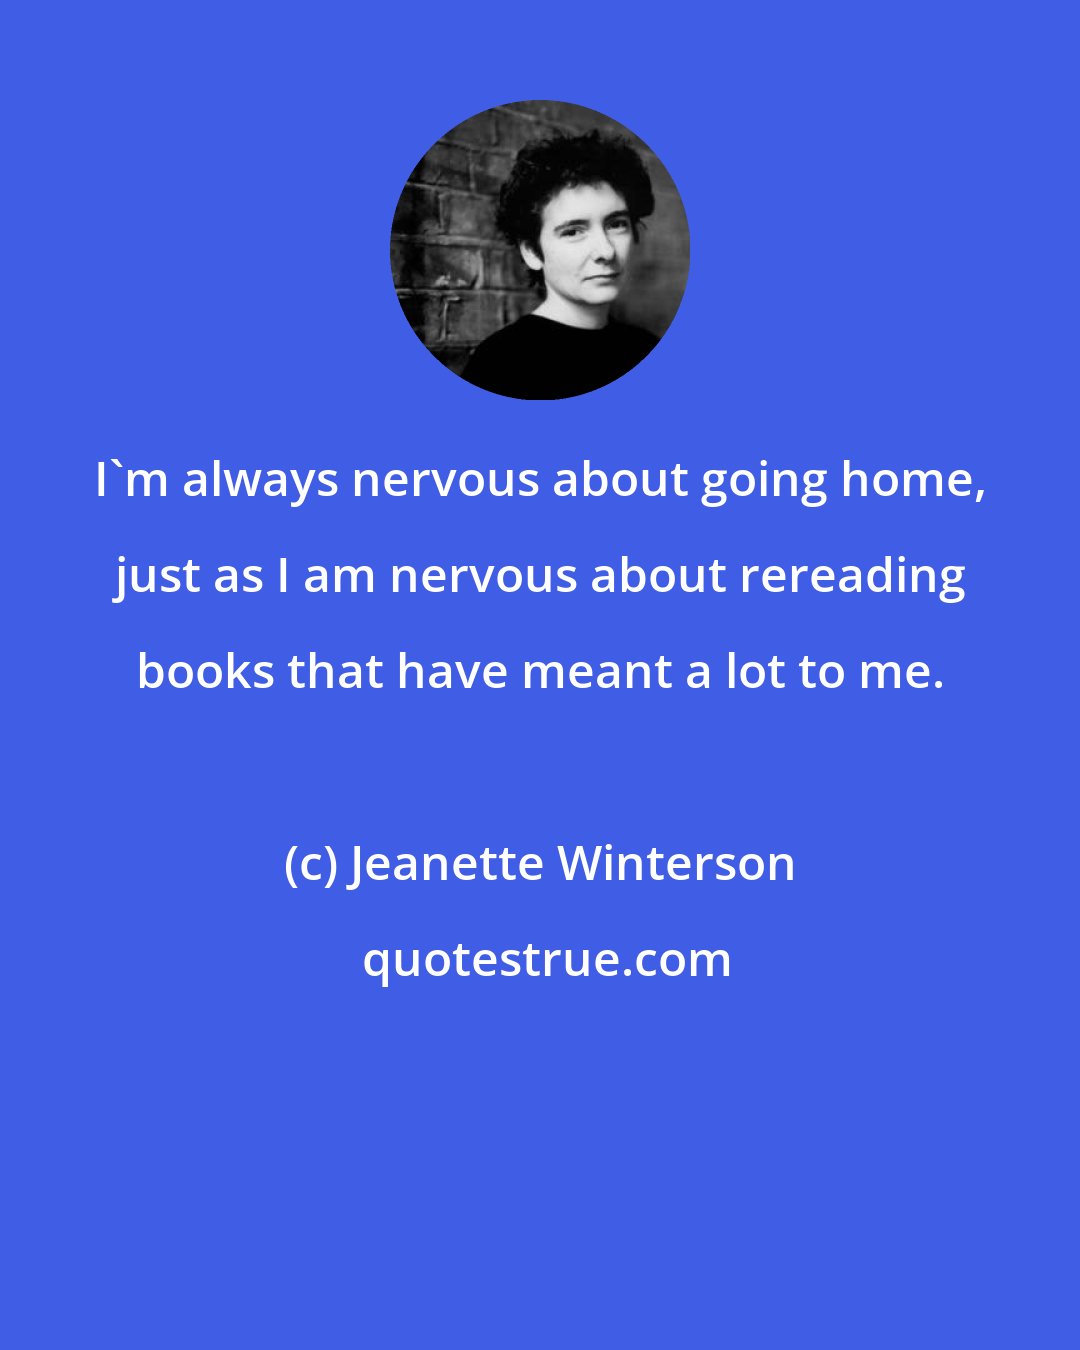 Jeanette Winterson: I'm always nervous about going home, just as I am nervous about rereading books that have meant a lot to me.